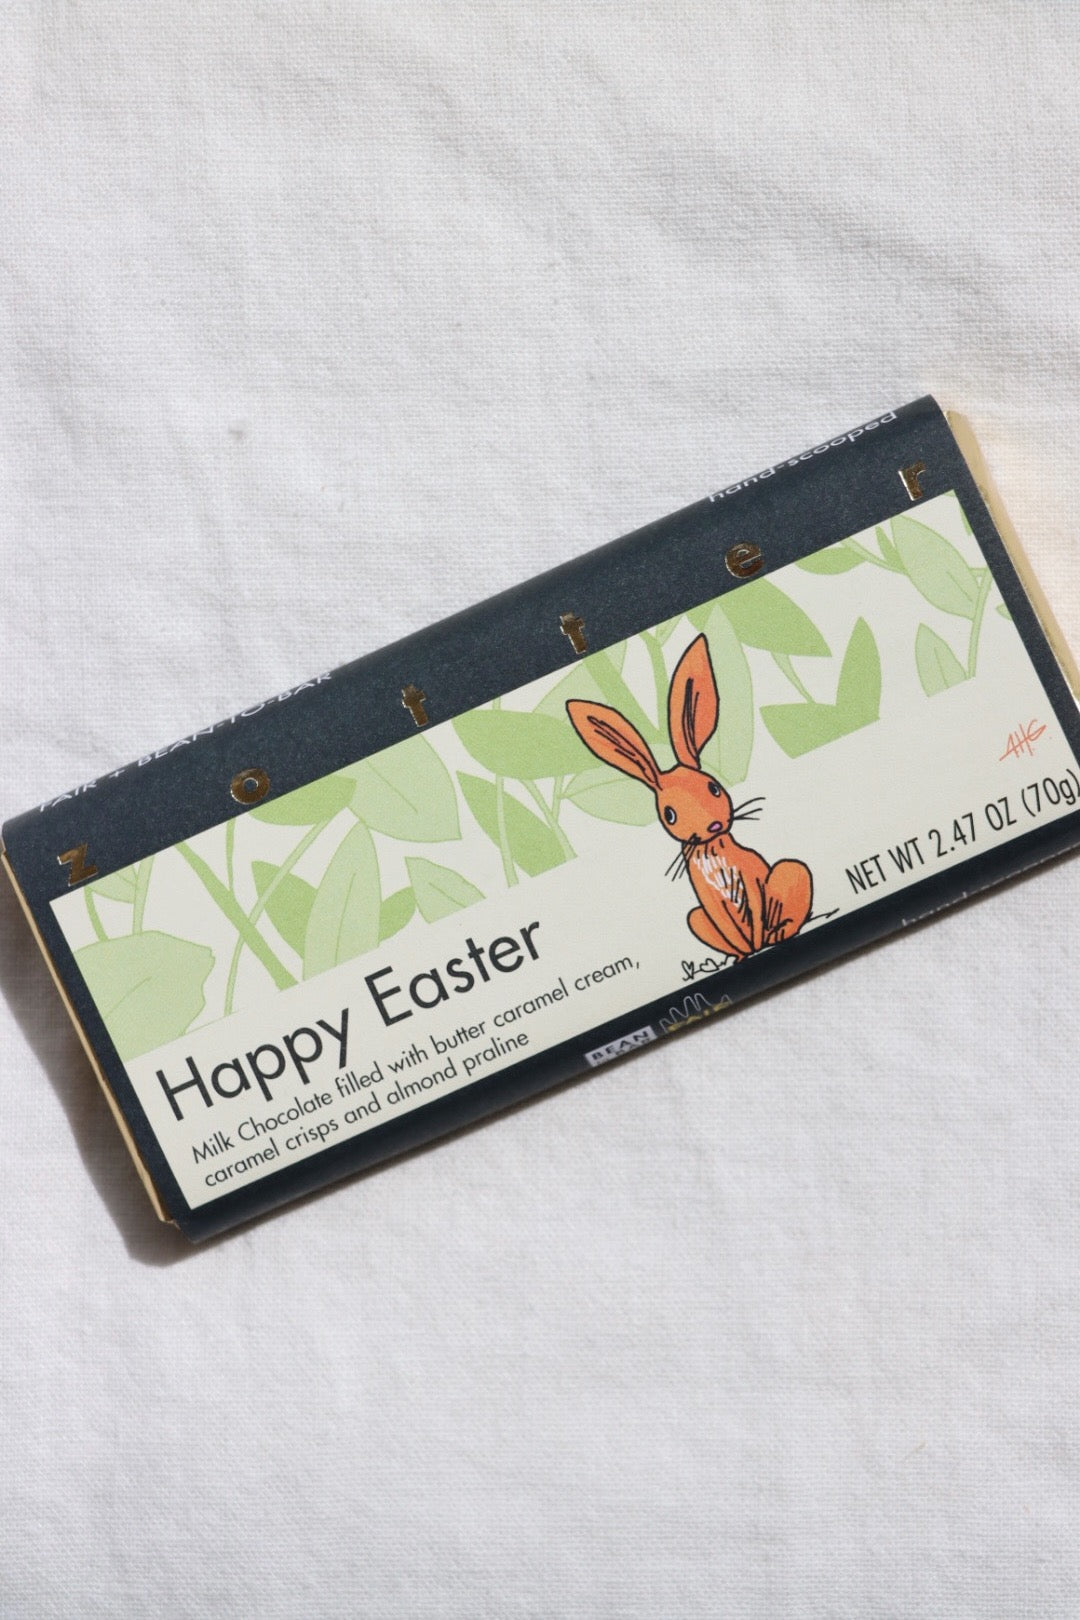 Happy Easter Hand-Scooped Chocolate Bar